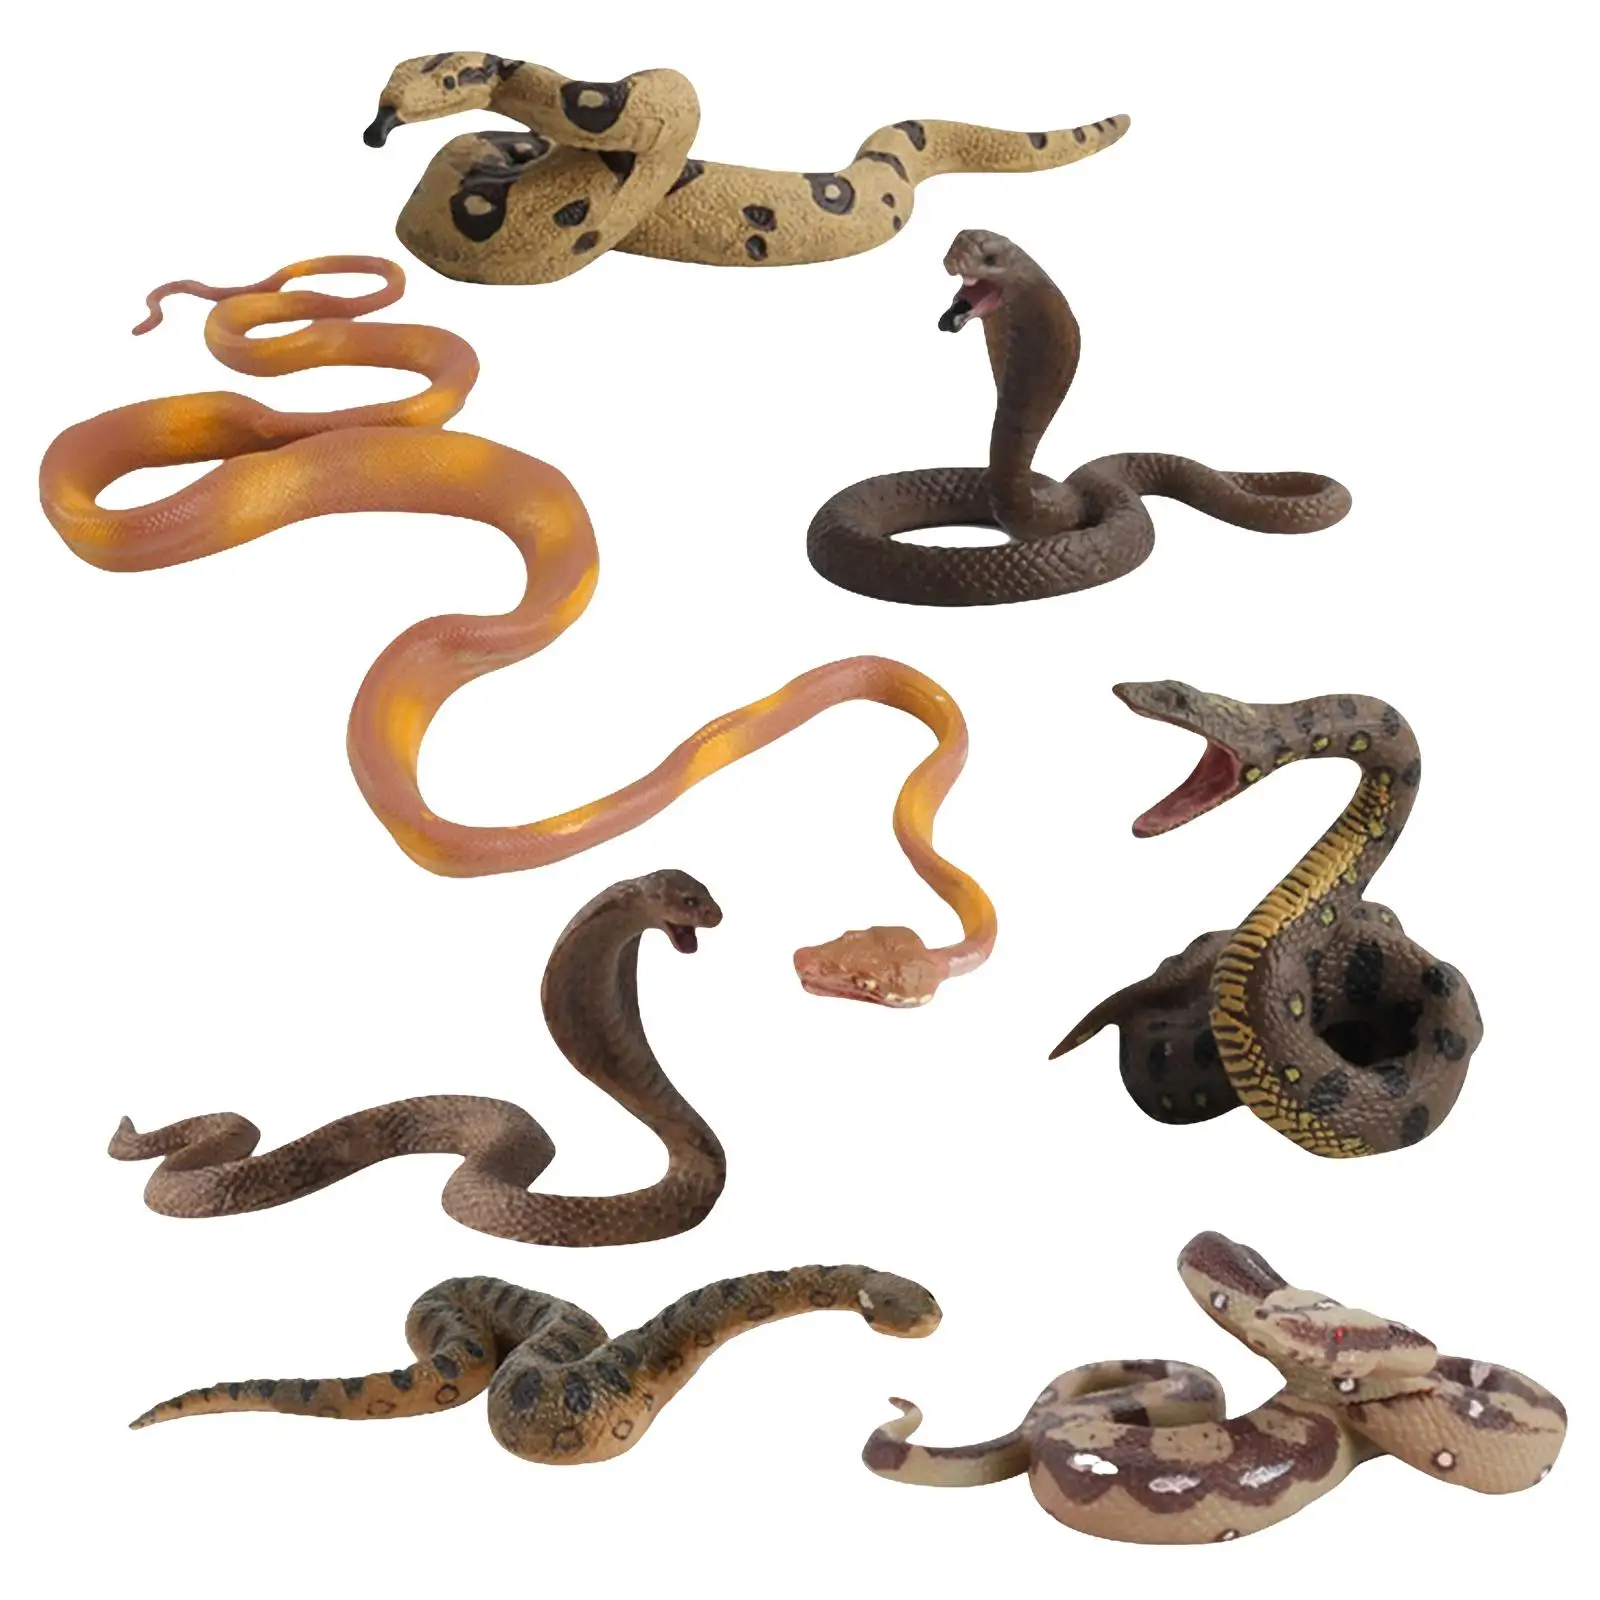 Simulation Artifical Snake Figurine Halloween Tricks Toy Educational Toys Snake Model Toy for Prop Tabletop Decors